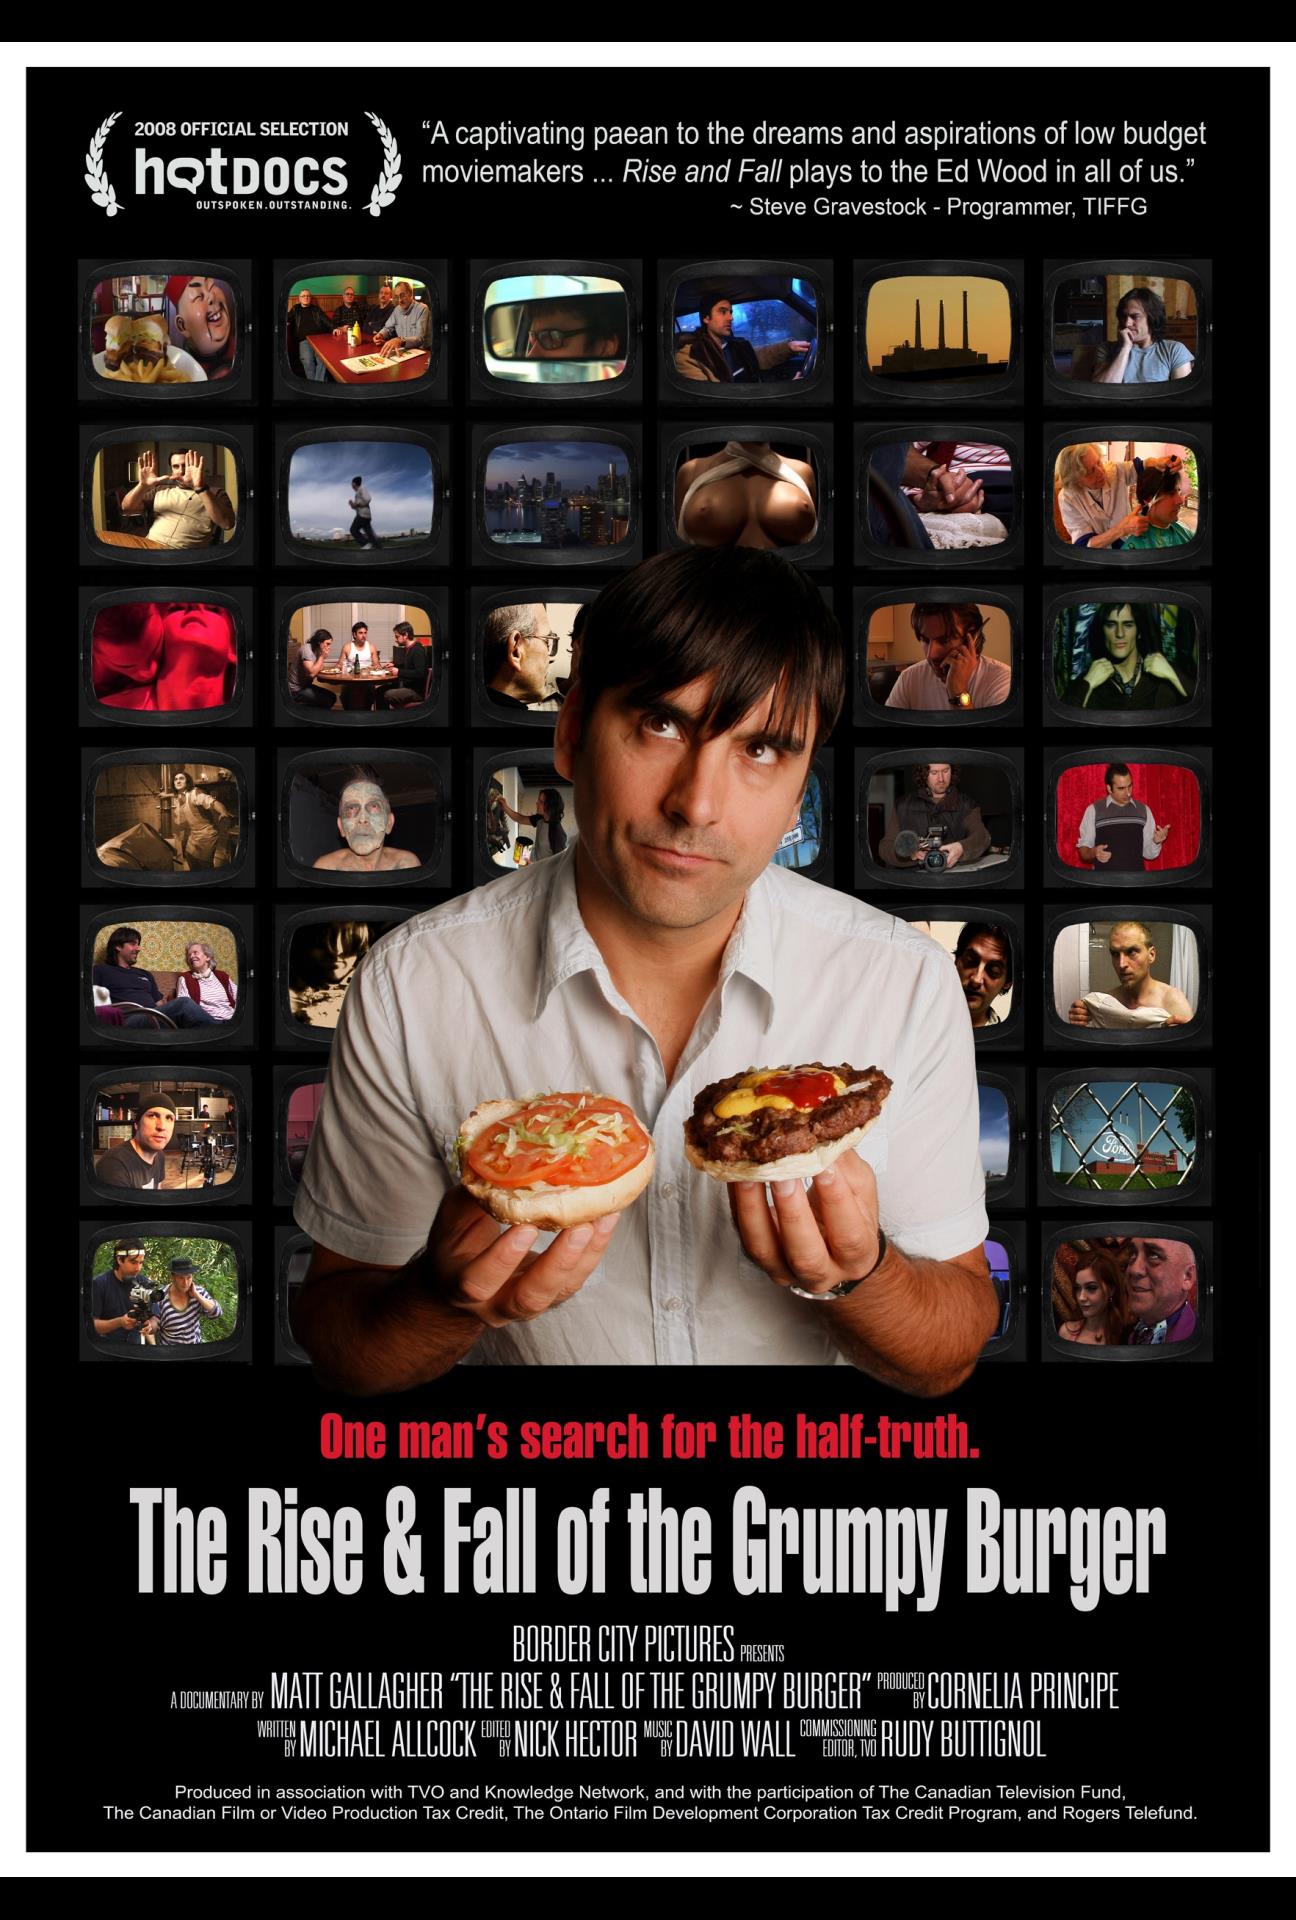 RISE AND FALL OF THE GRUMPY BURGER, THE